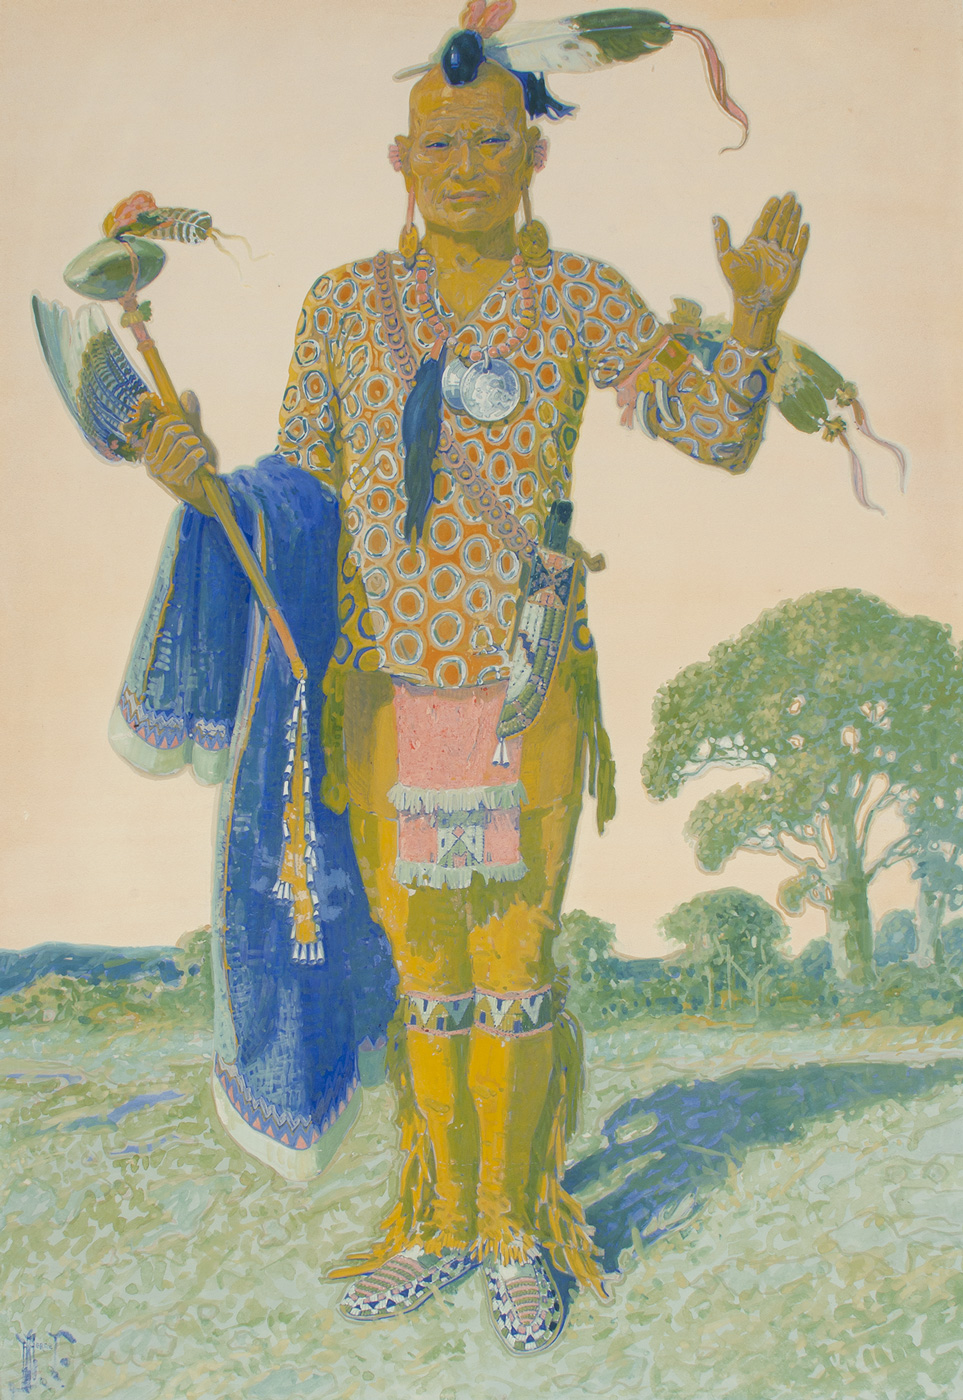 A full length portrait of a standing Apache man in tribal clothing.